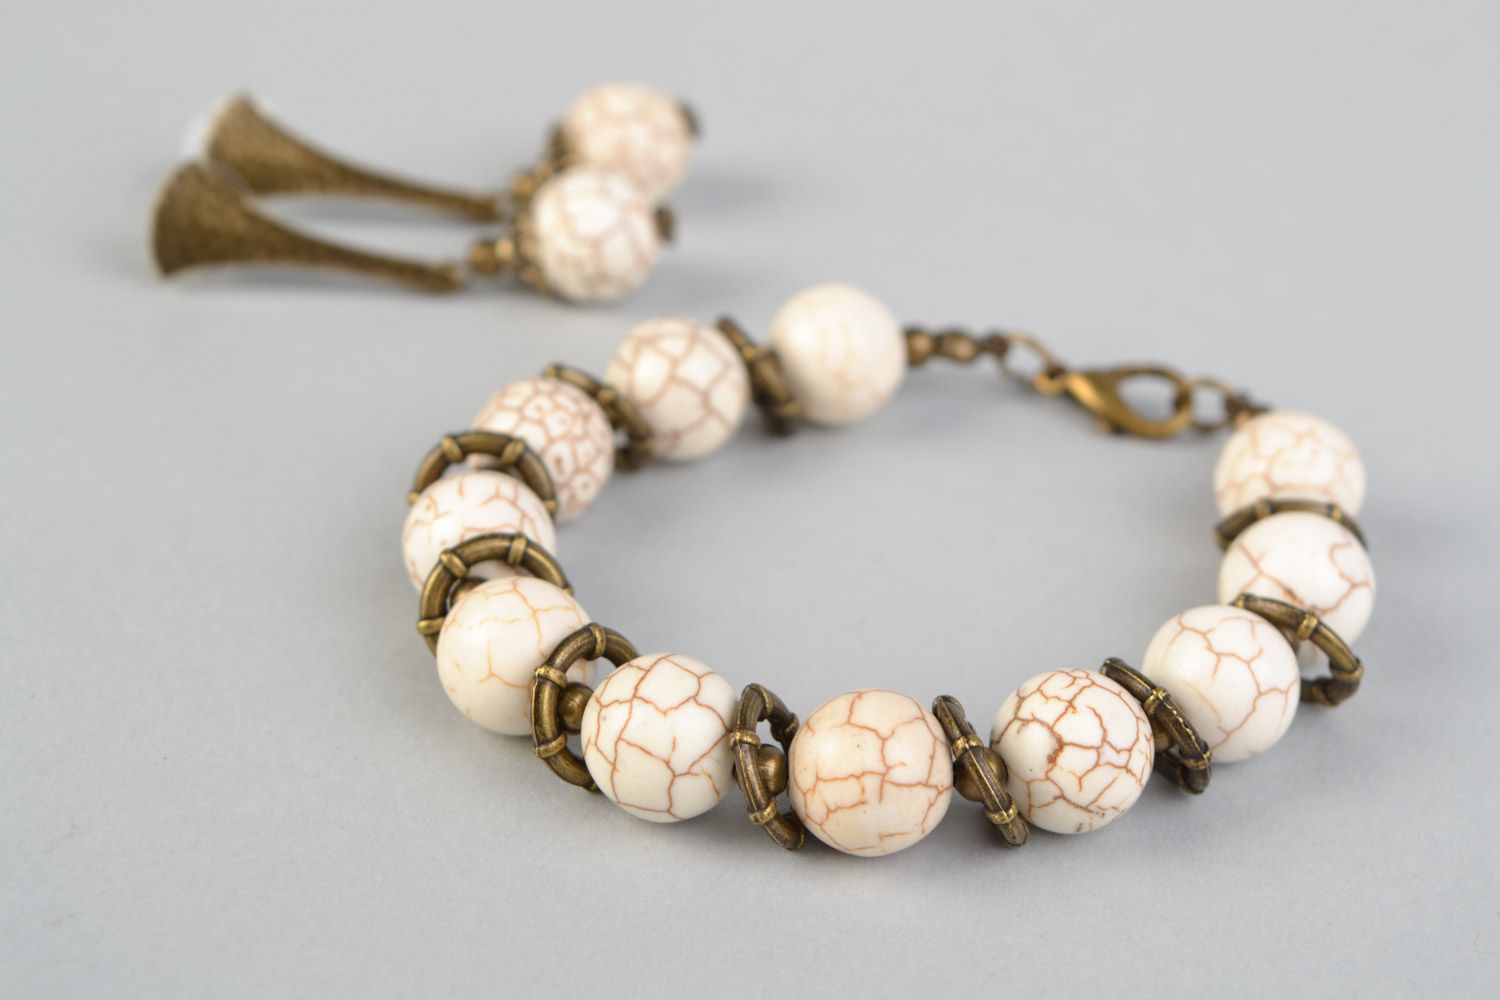 Handmade natural stone jewelry set bracelet and earrings with howlite   photo 4